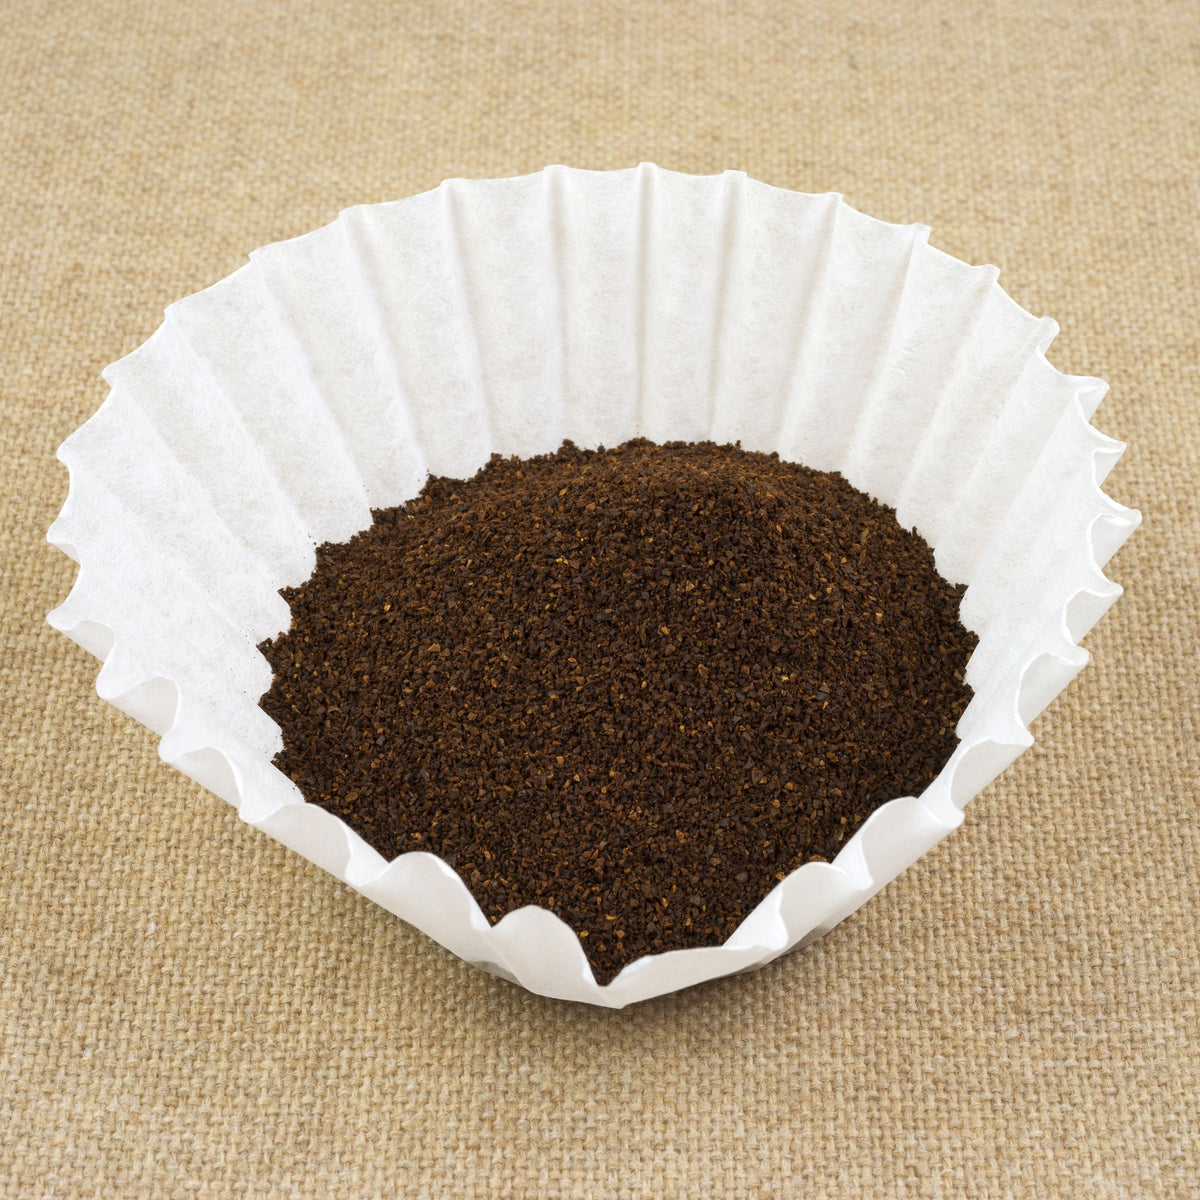 Coffee Filter with Ground Coffee